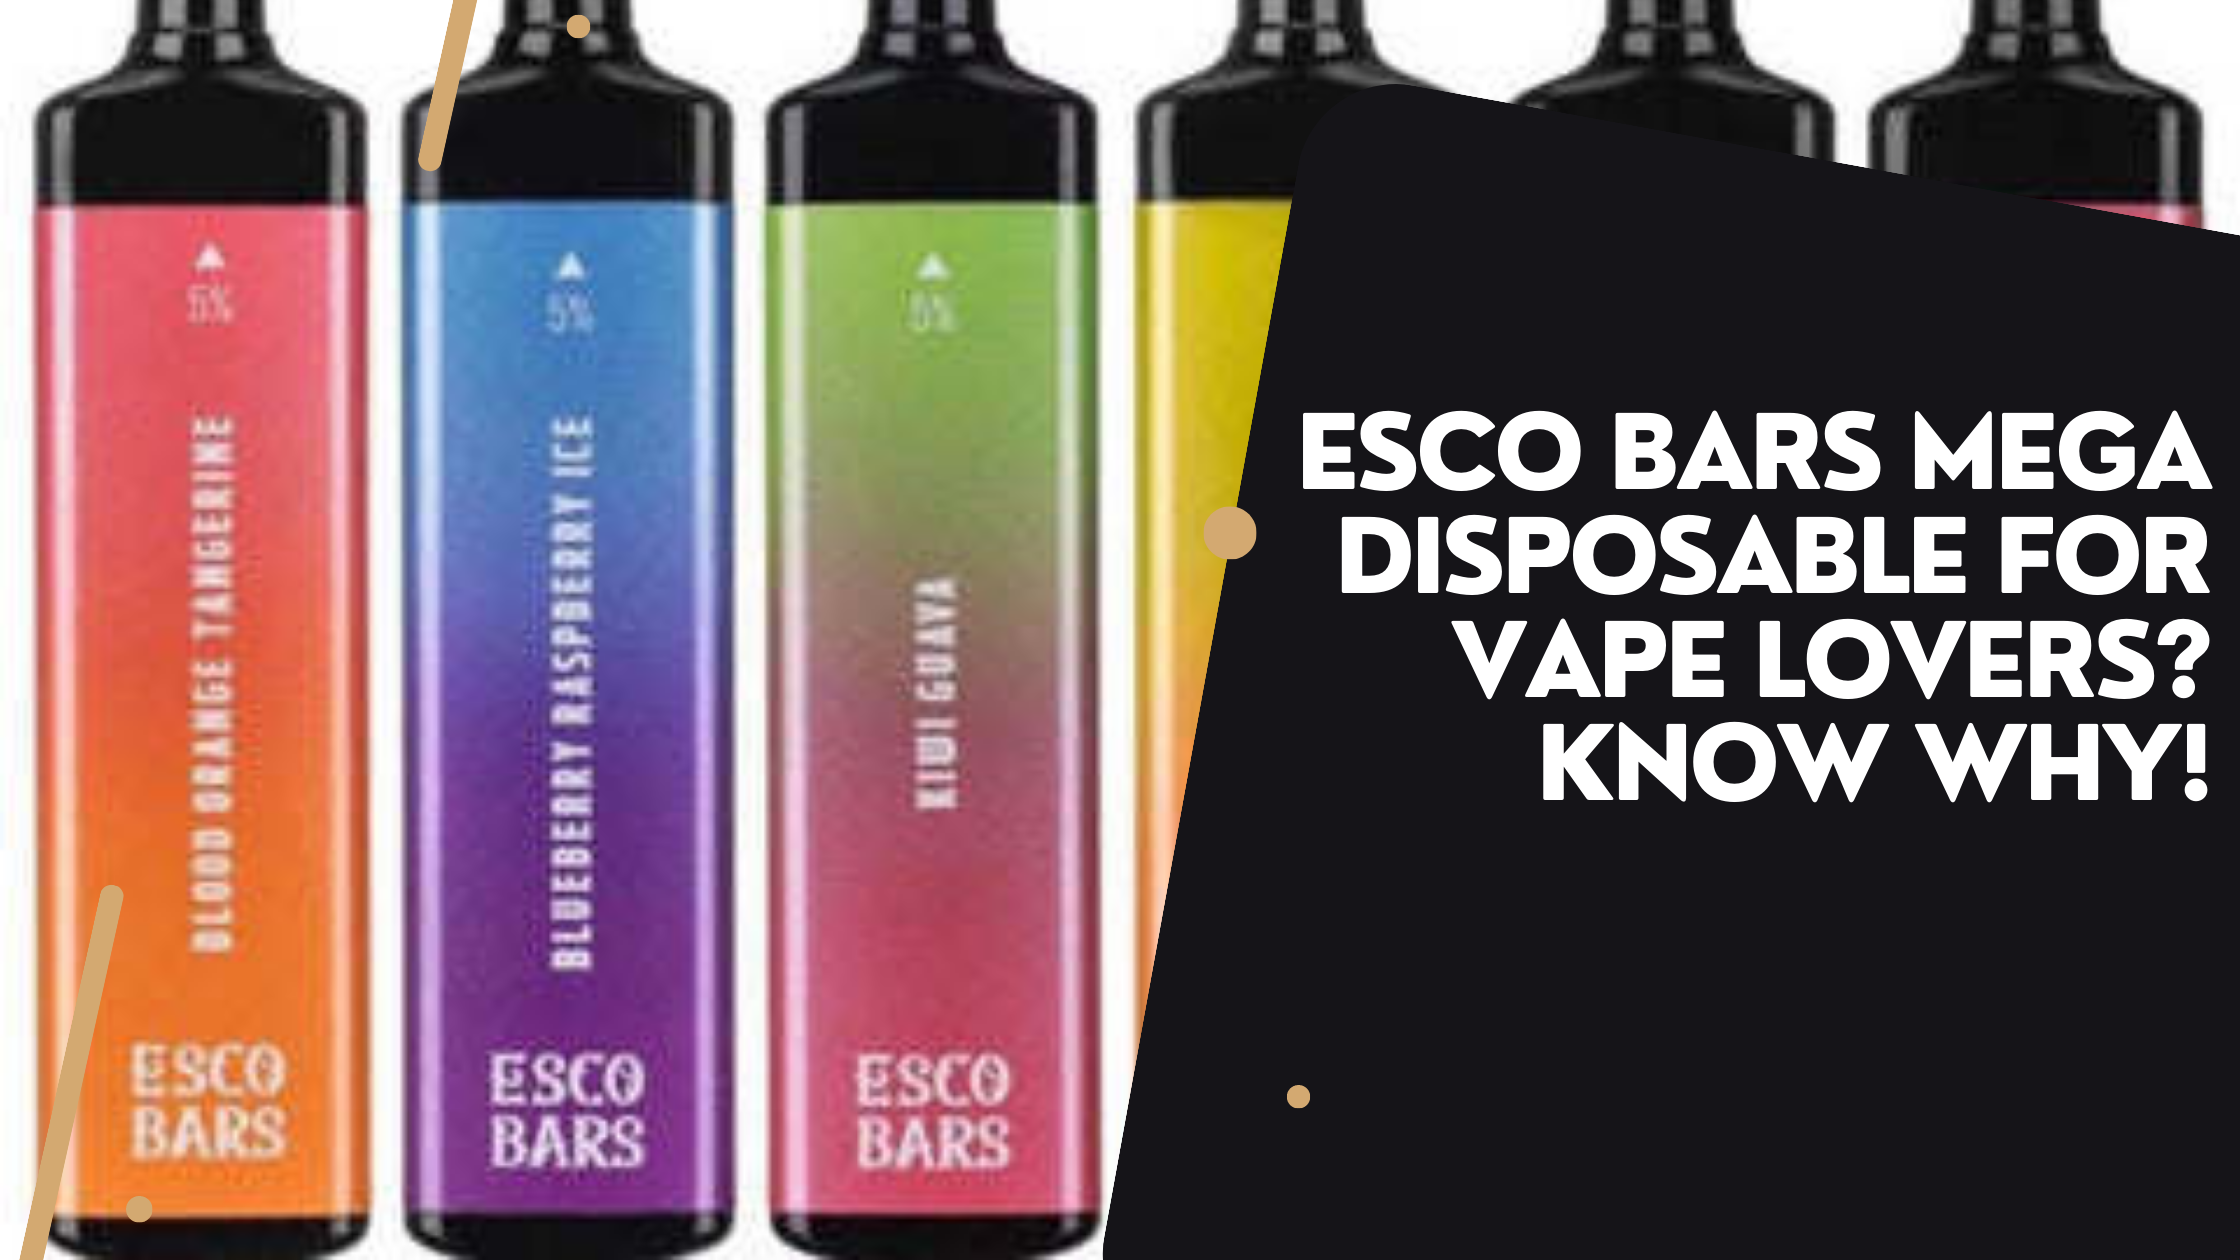 Esco Bars Mega Disposable For Vape Lovers? Know Why!